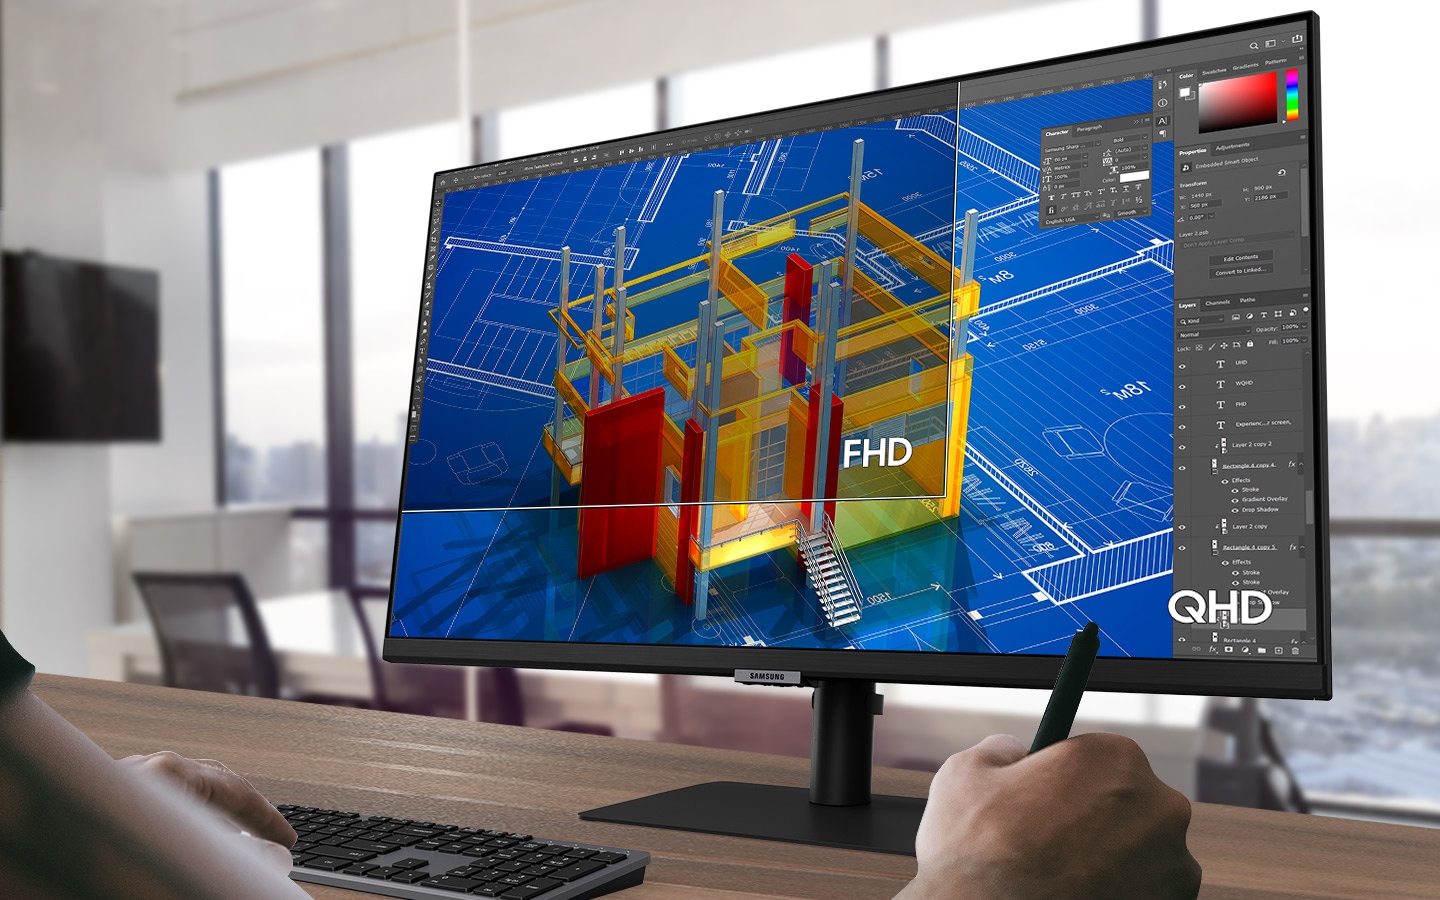 FHD and QHD appear on the monitor screen in order, comparing the available screen areas by resolution.